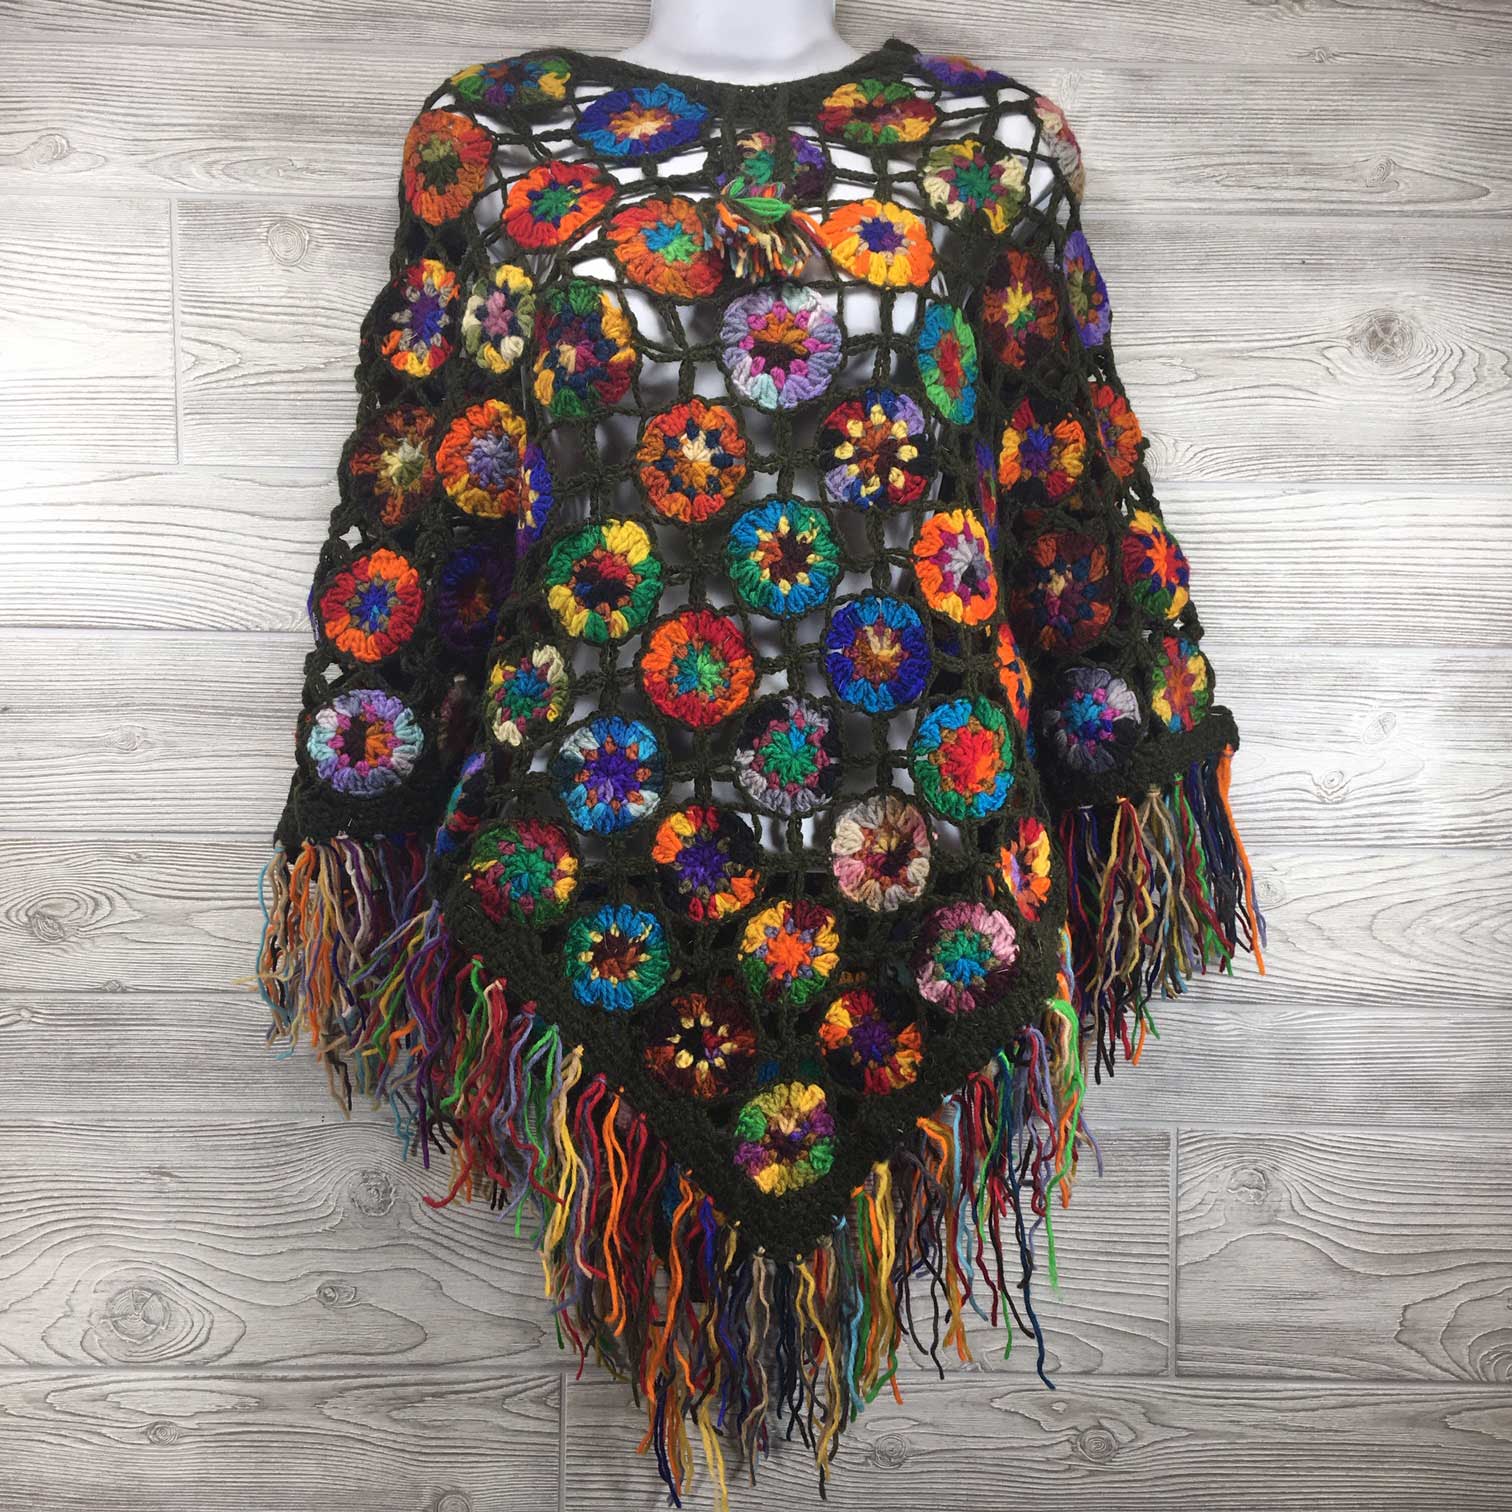 Women's Crochet Granny Square Wool Poncho with Fringes - One Size – Amadara